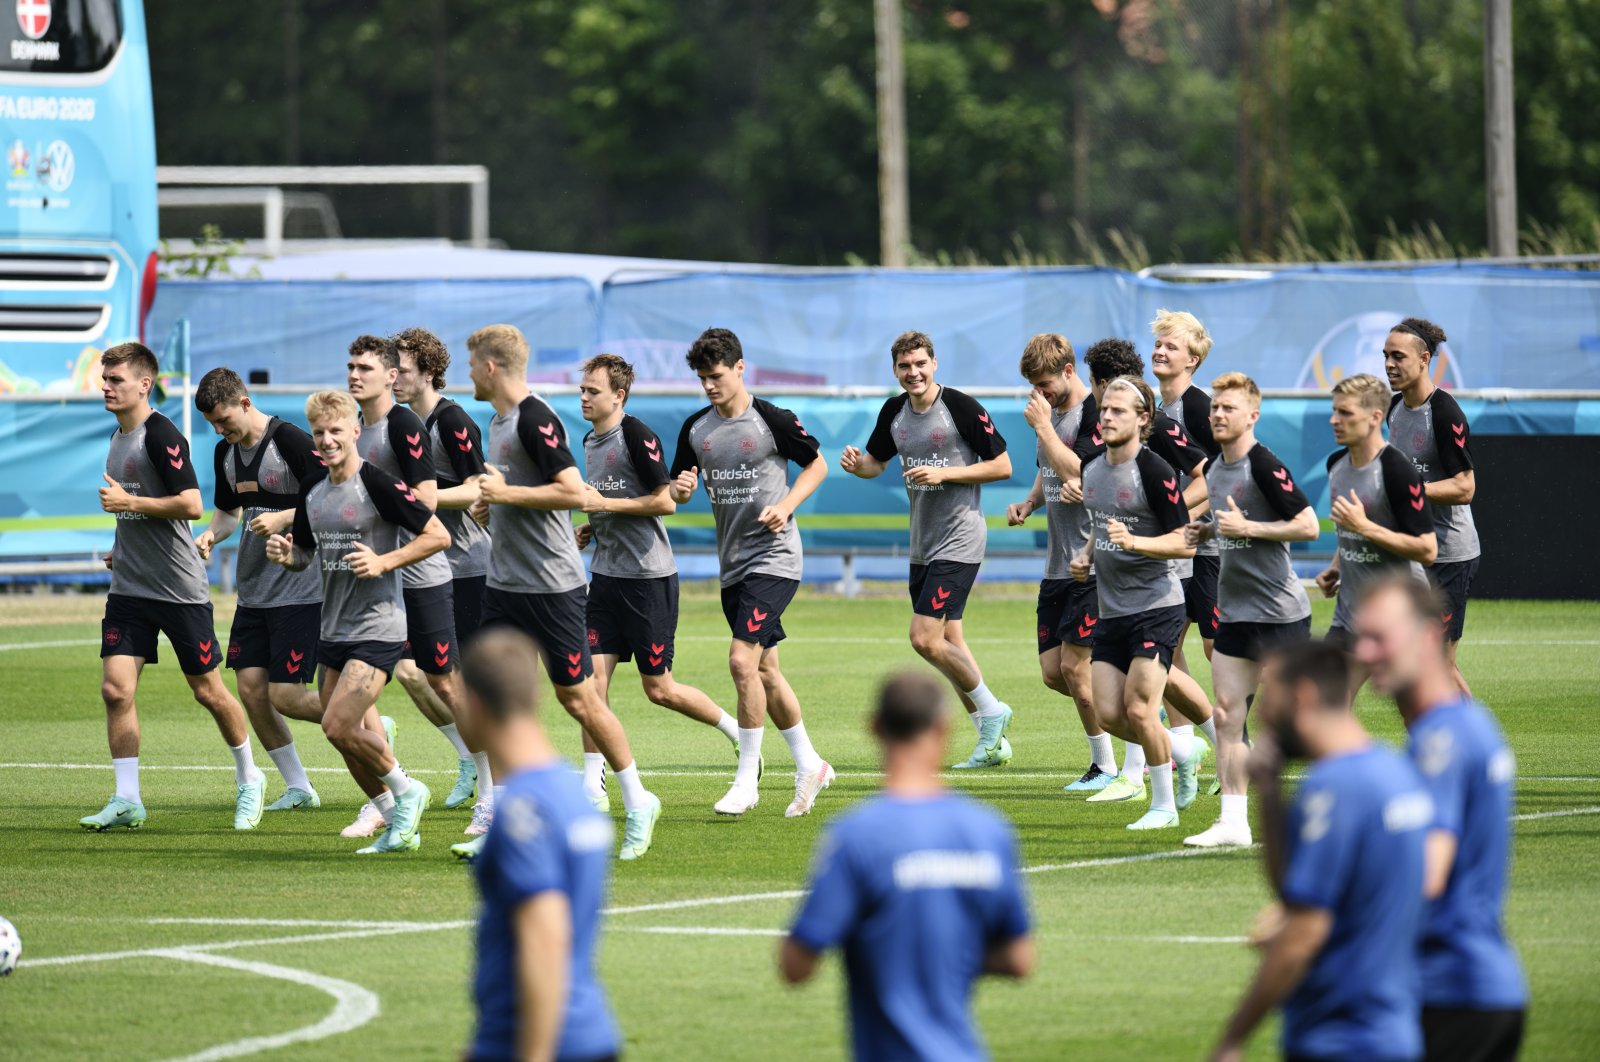 The Danish national football team players during a training session in Elsinore, Denmark, June 19, 2021. (EPA Photo)